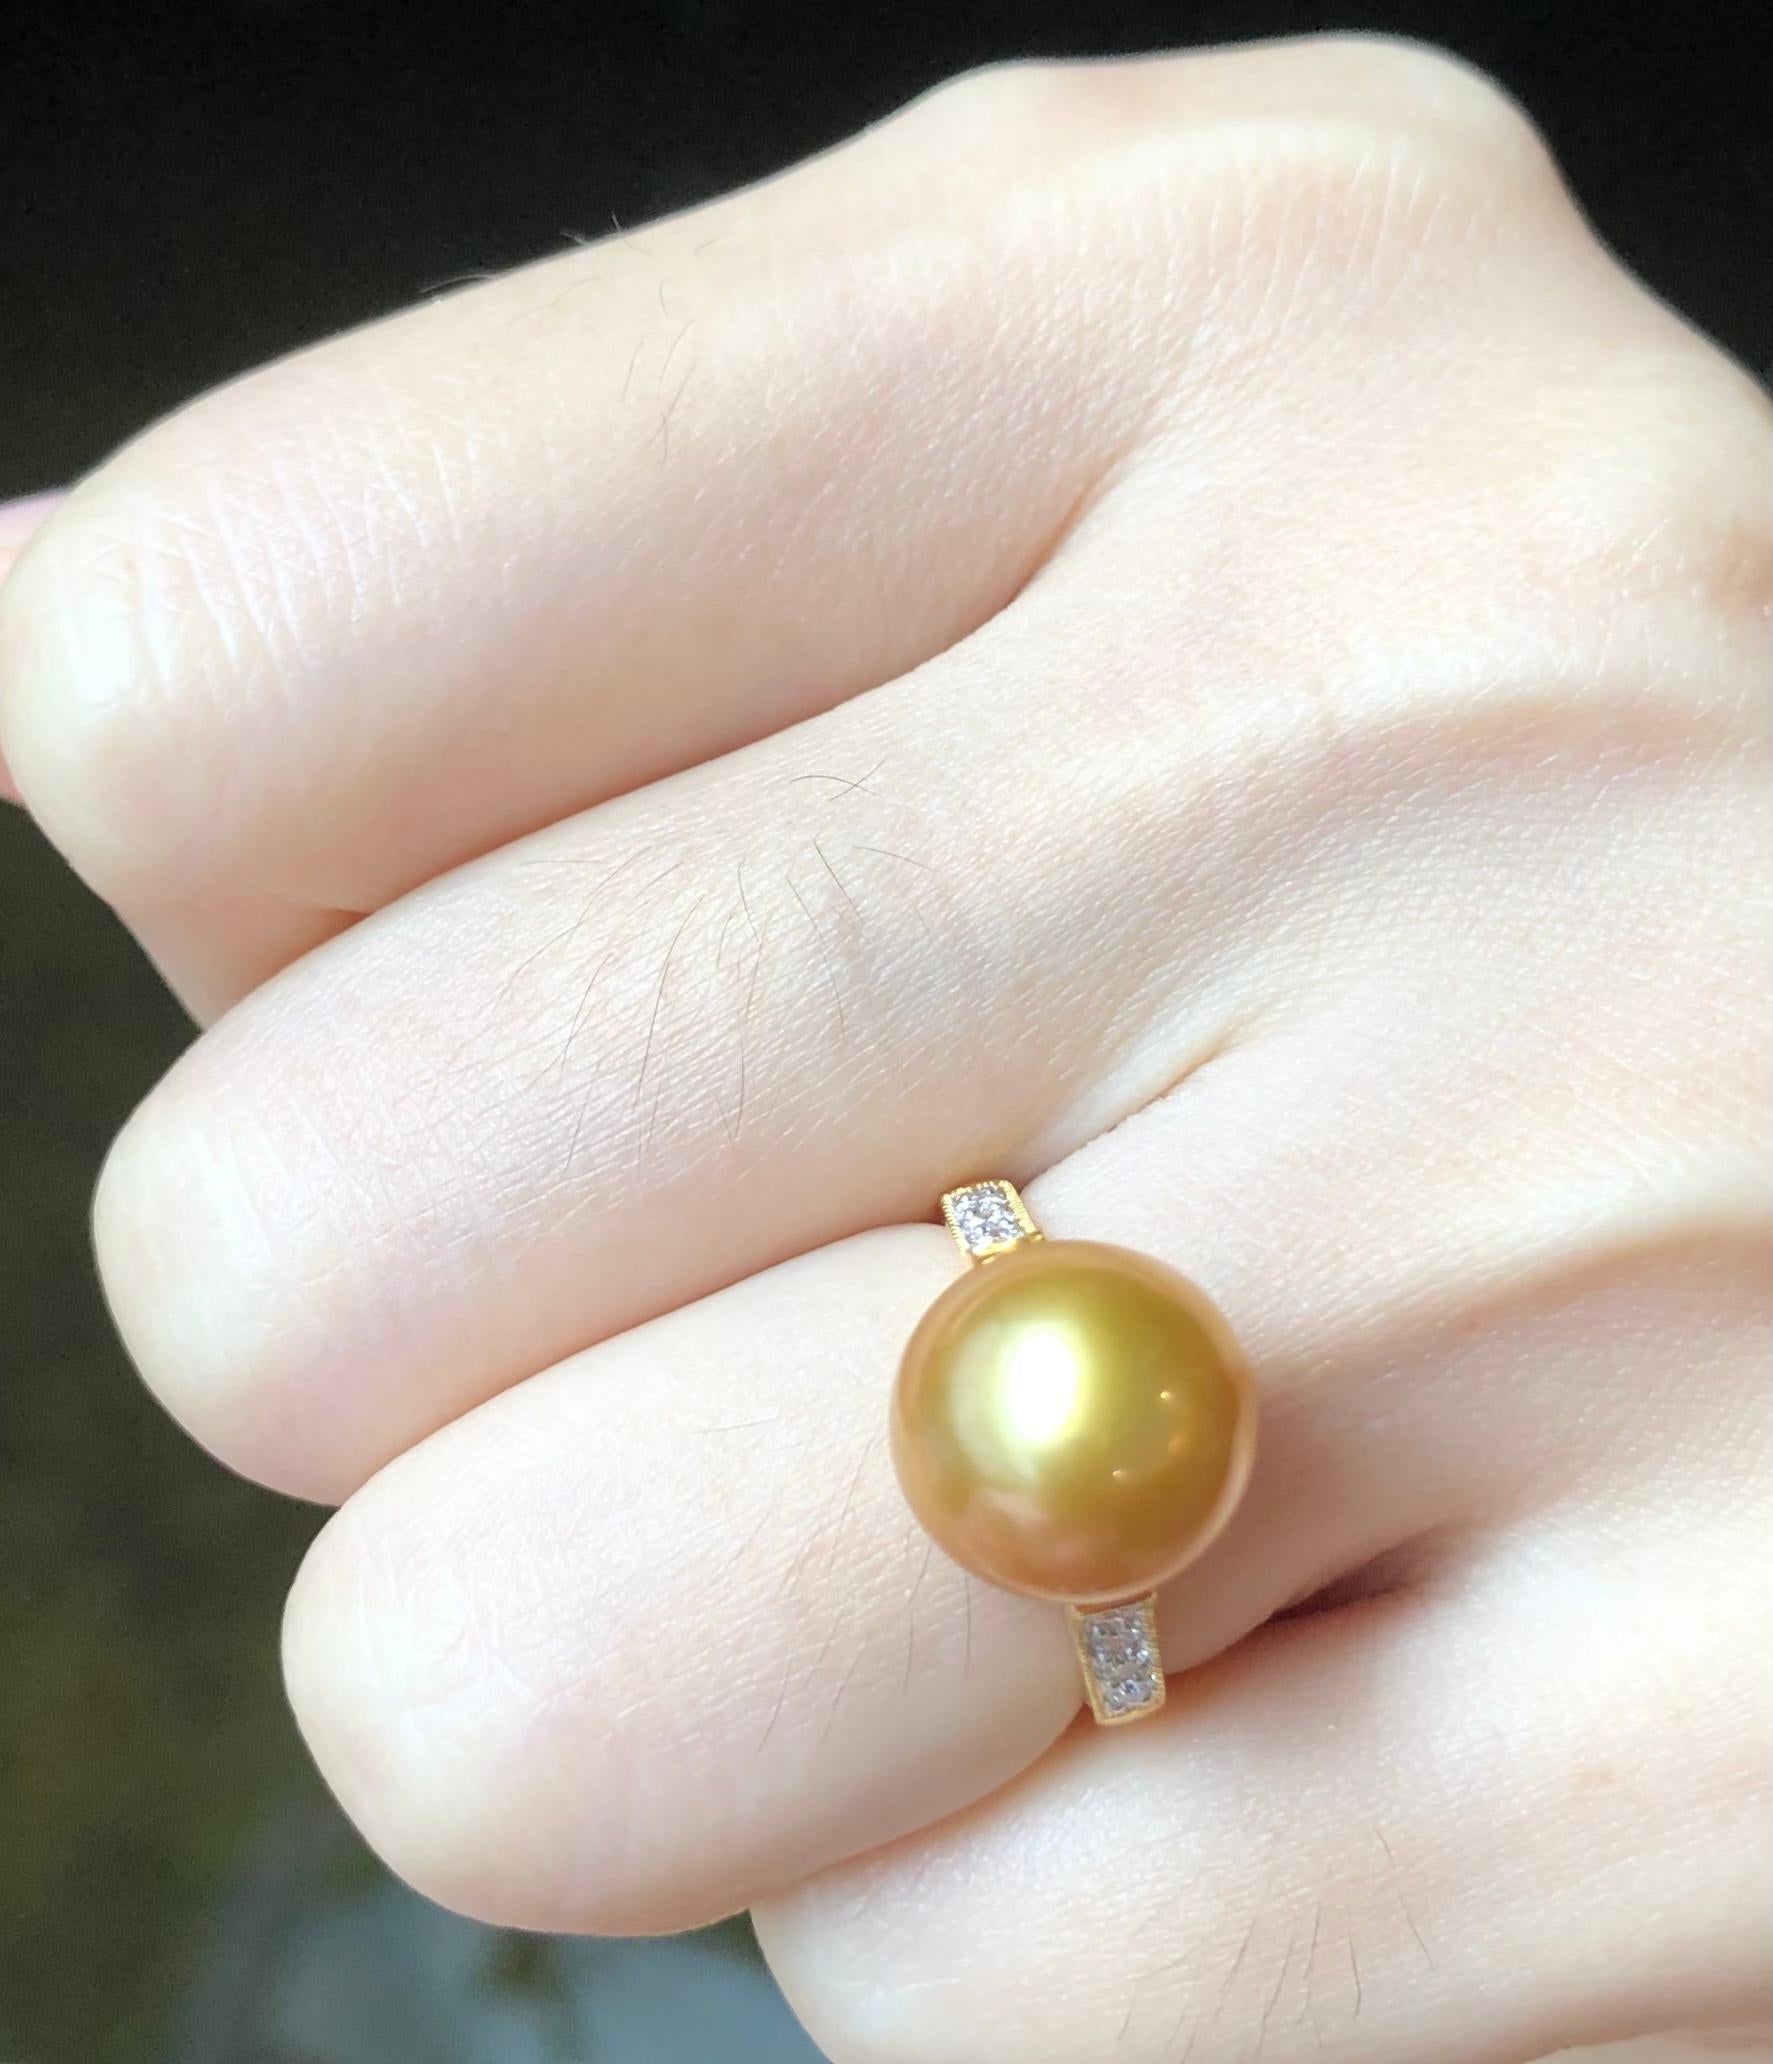 Brilliant Cut Golden South Sea Pearl with Diamond Ring Set in 18 Karat Gold Settings For Sale